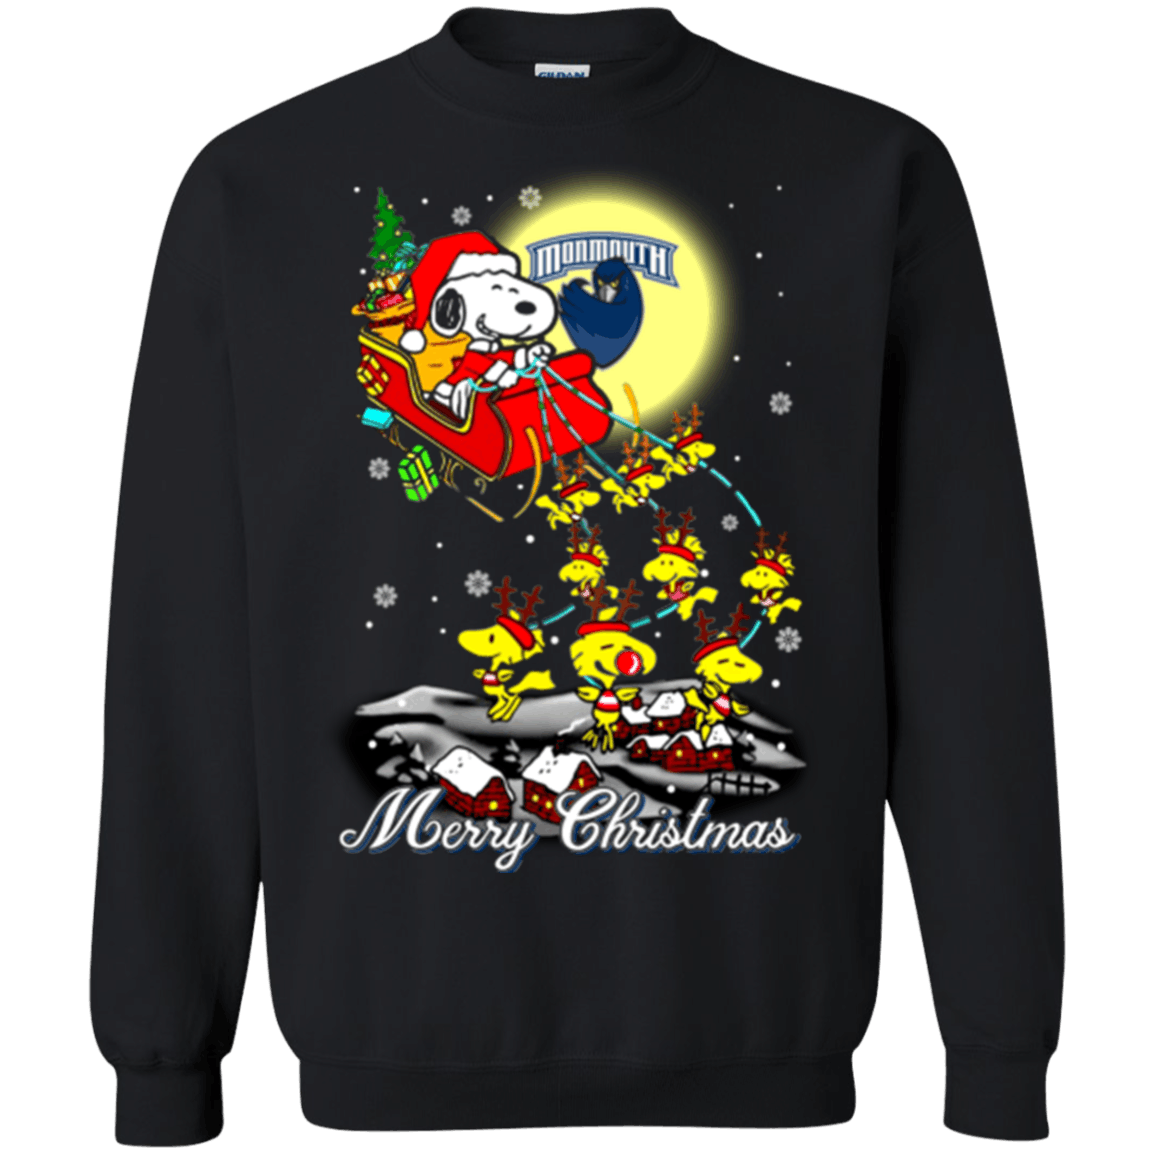 Greate Monmouth Hawks Ugly Christmas Sweaters Santa Claus With Sleigh And Snoopy Sweatshirts